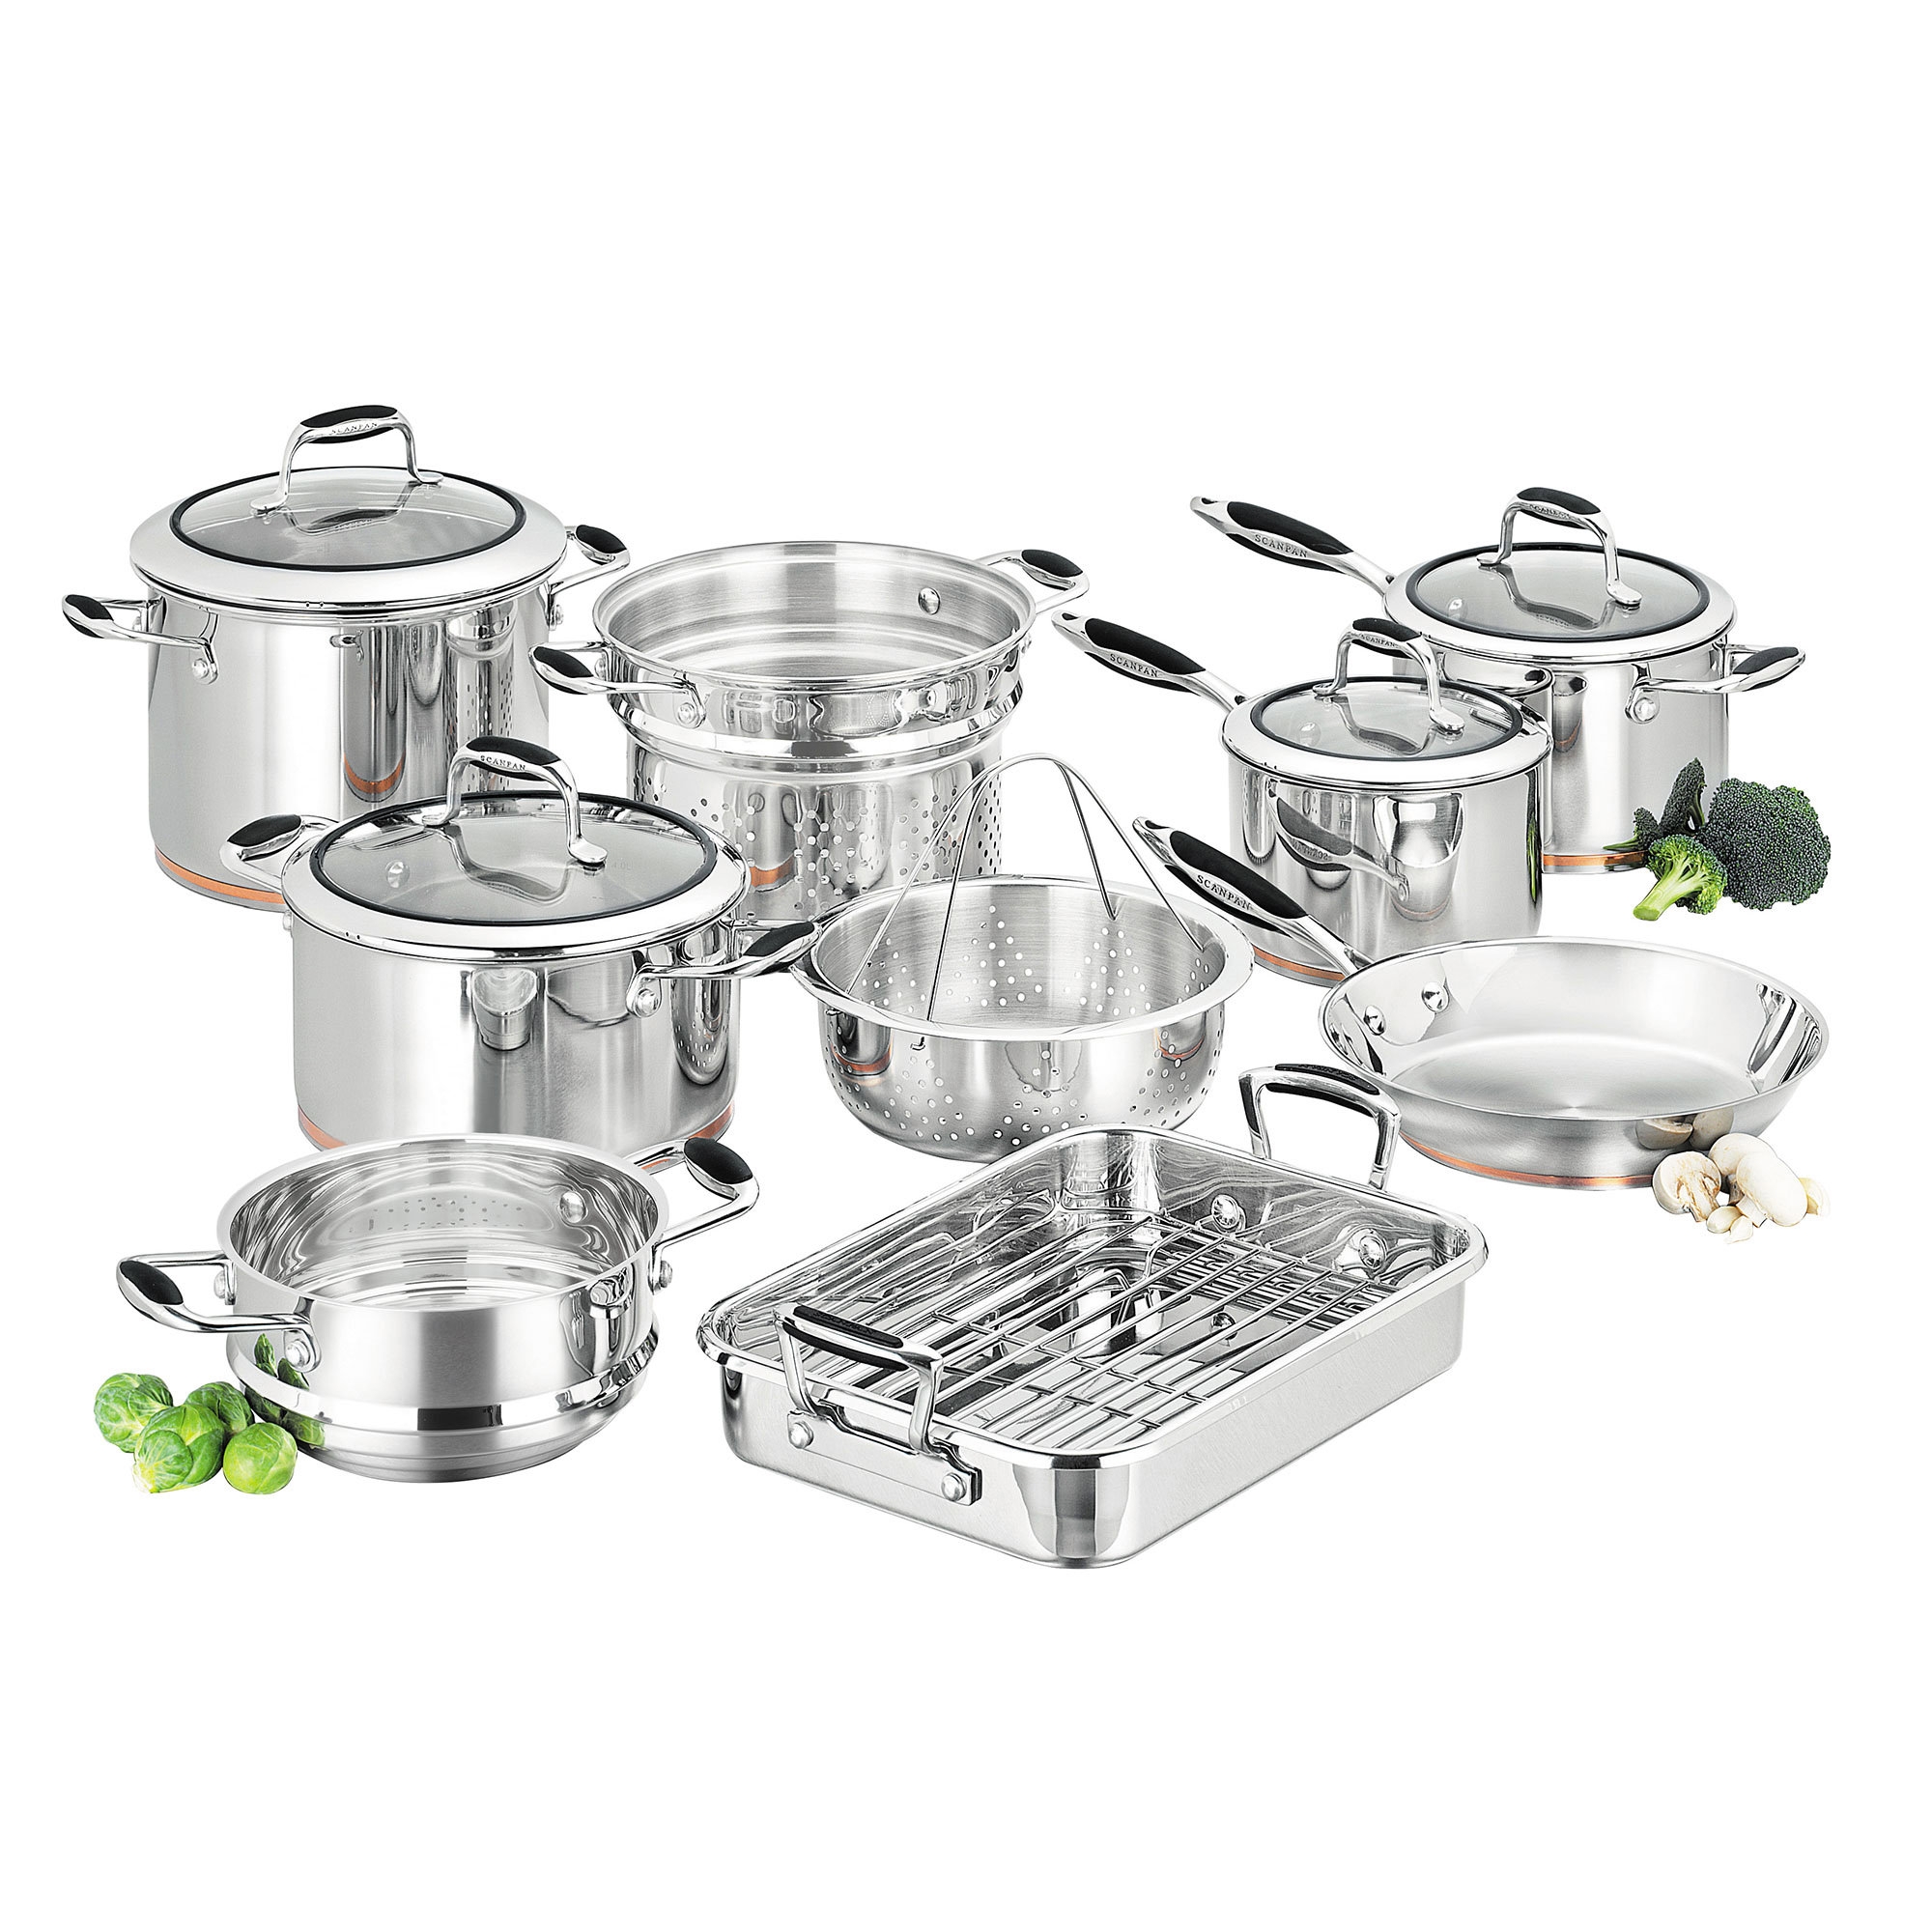 Scanpan Coppernox 9pc Stainless Steel Cookware Set Image 2